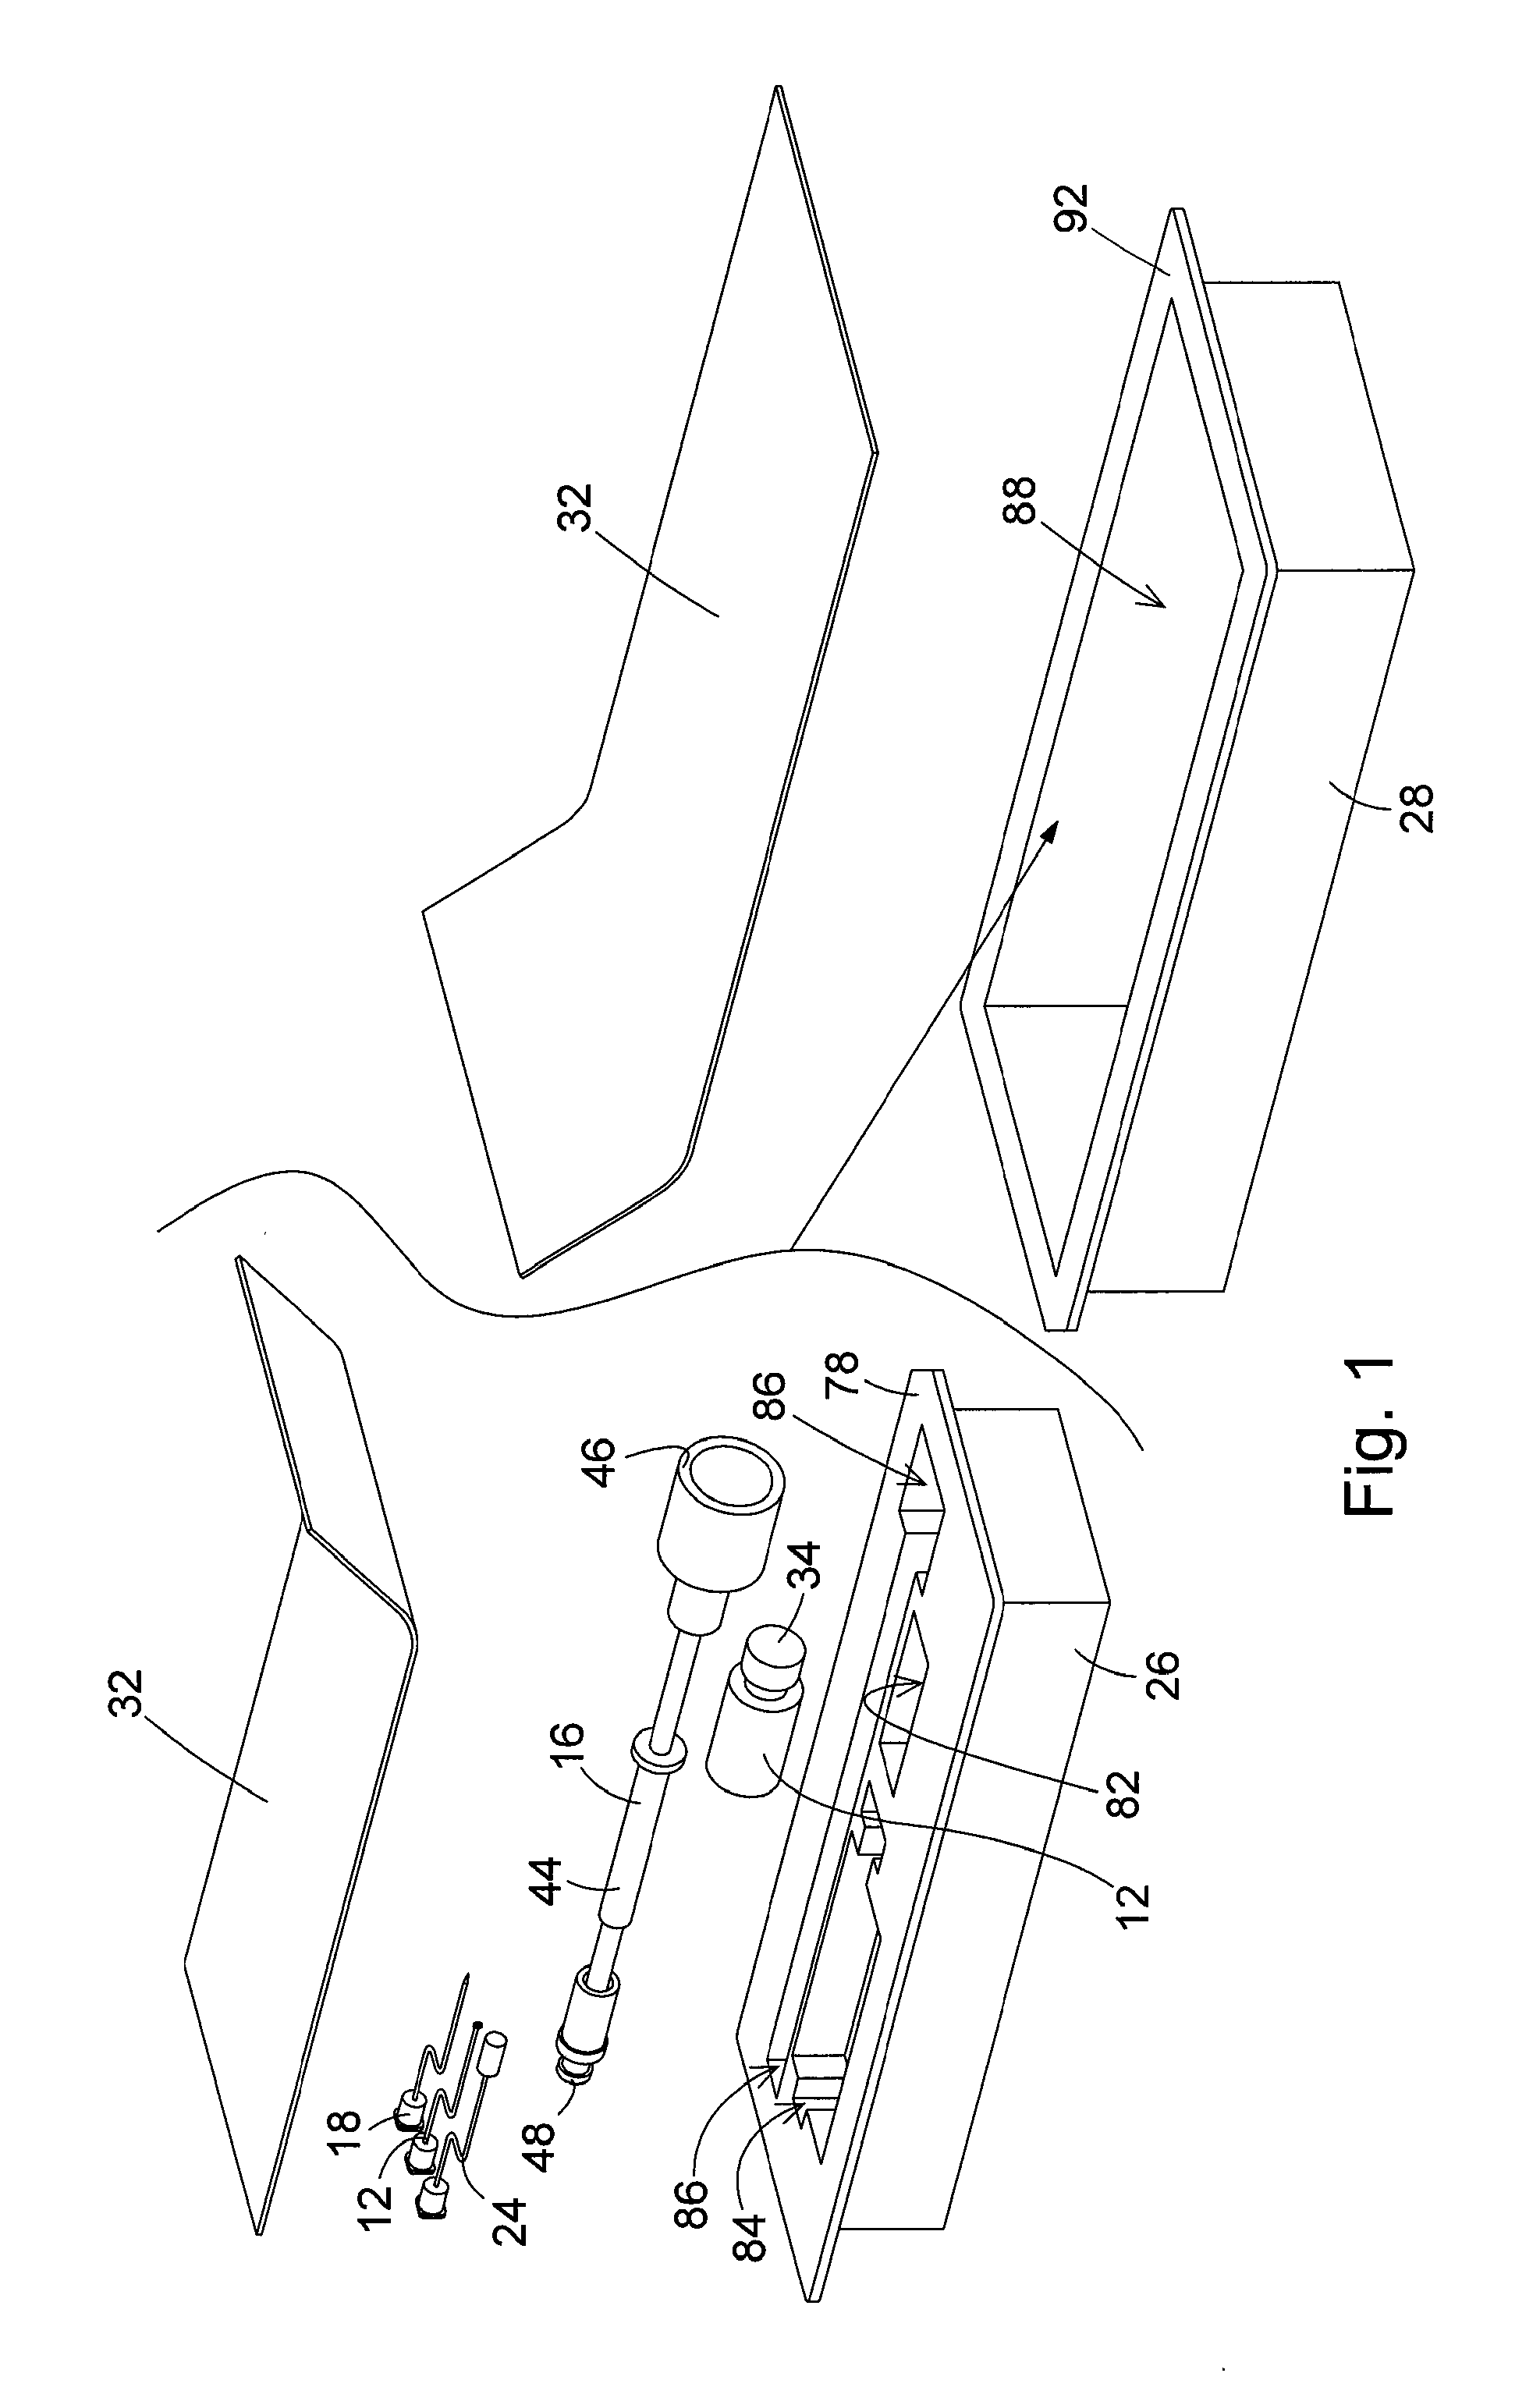 Apparatus and Method for Application of a Pharmaceutical to a Surface of an External Ear Canal for Treatment of Keratosis Obutrans